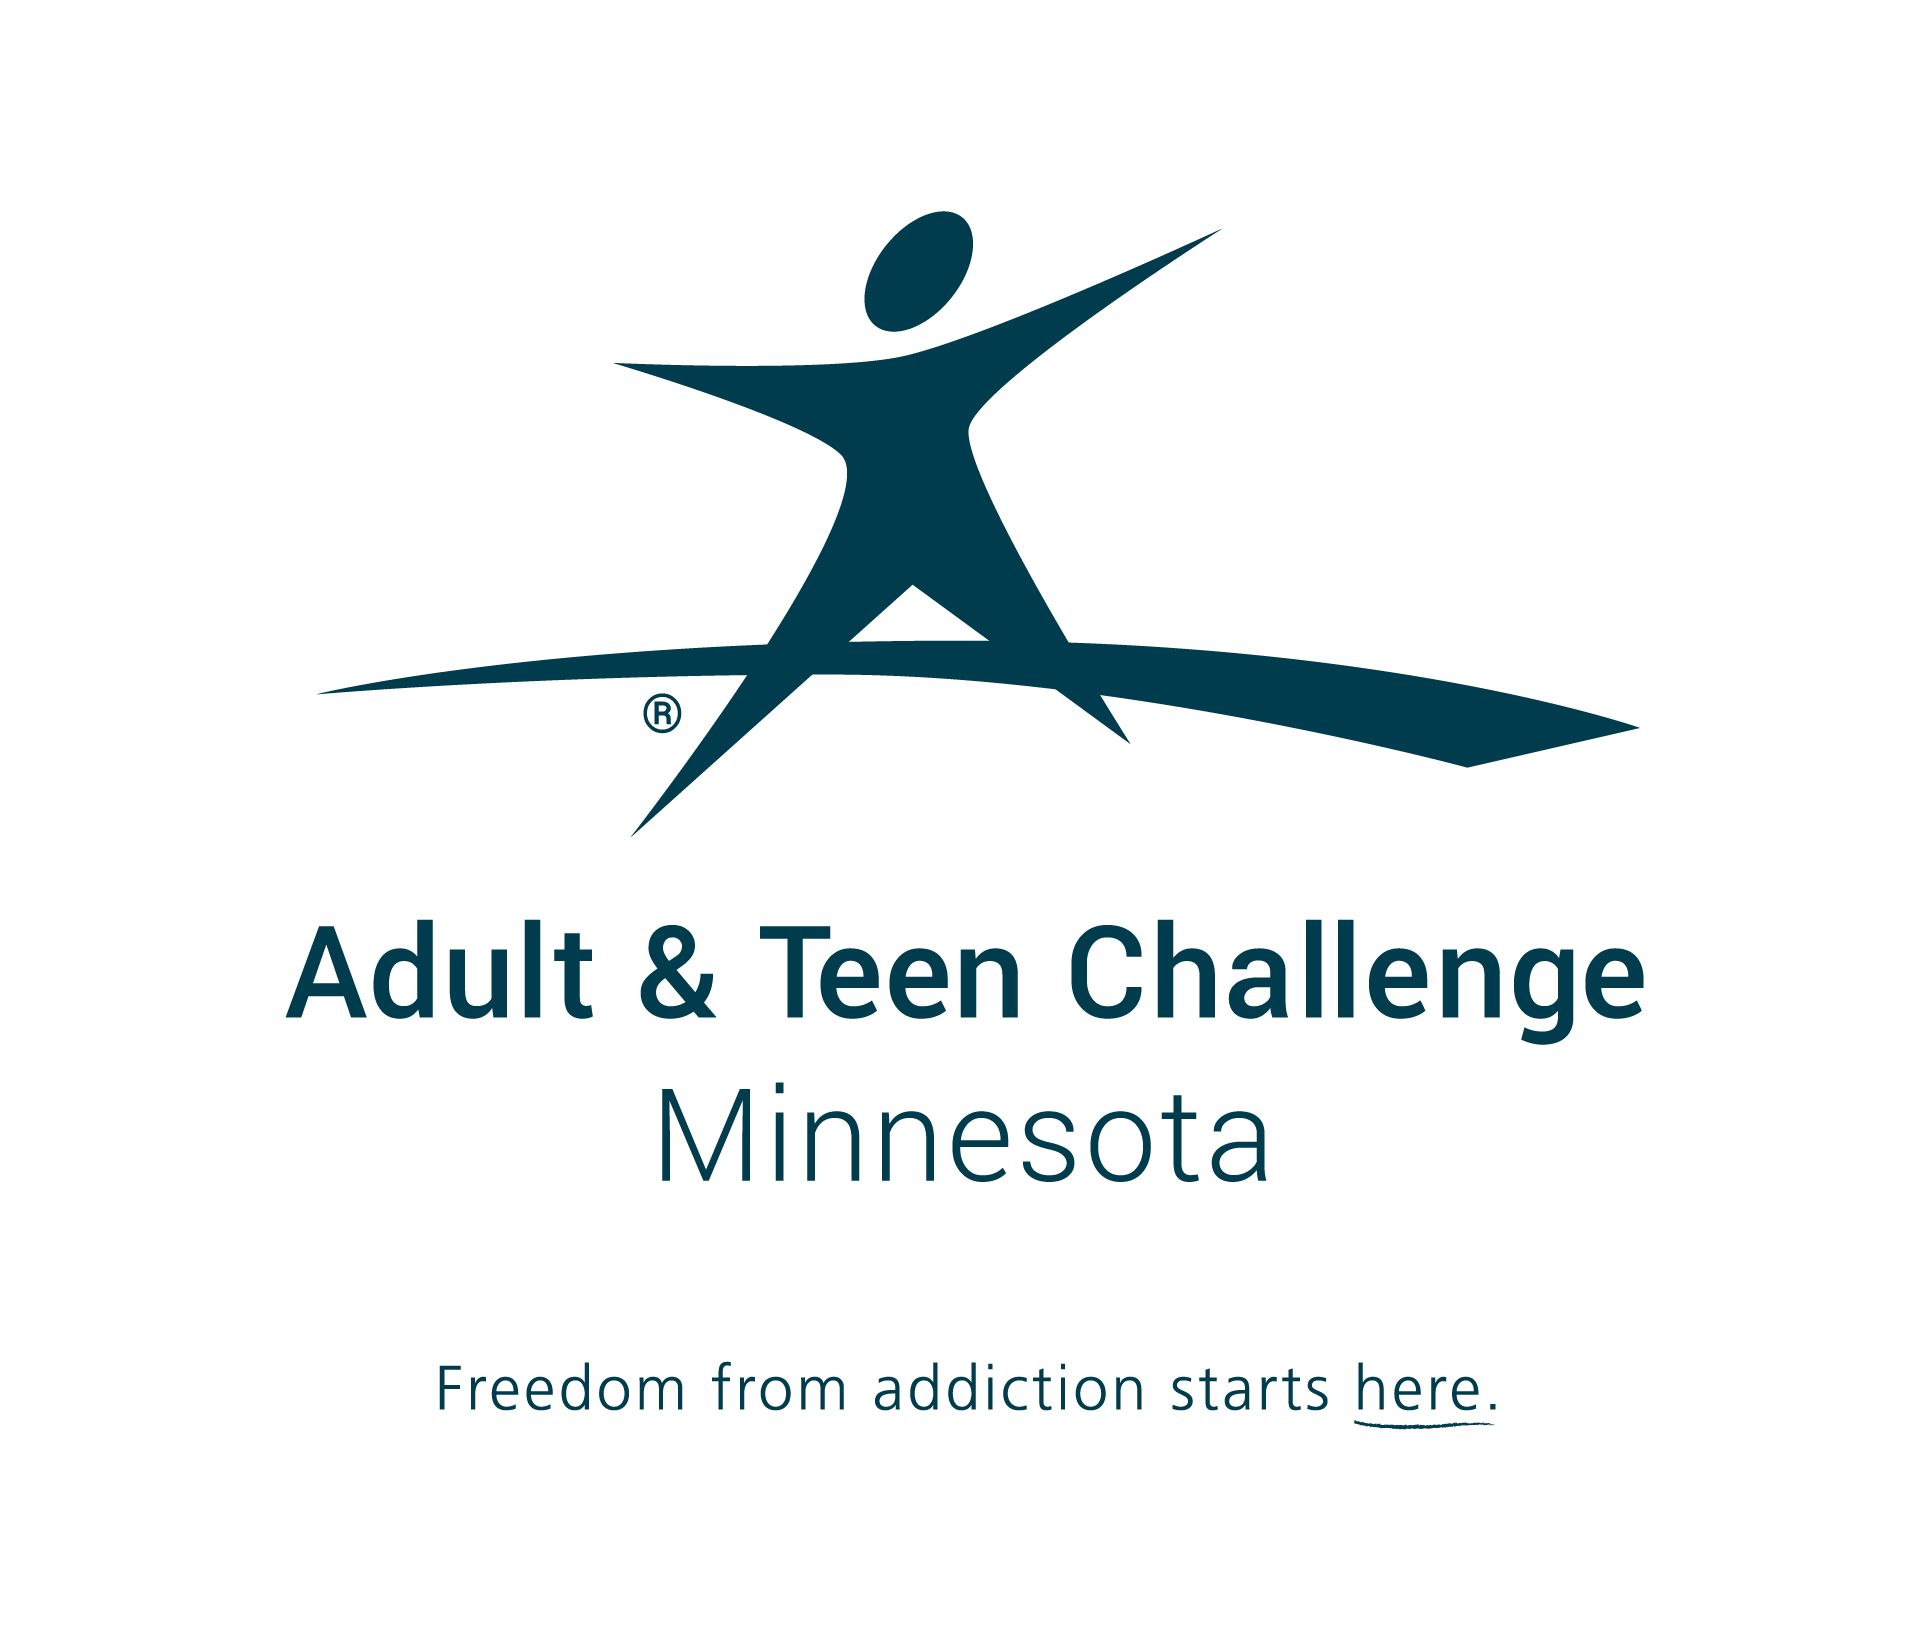 Minnesota Adult & Teen Challenge – Crystal Outpatient